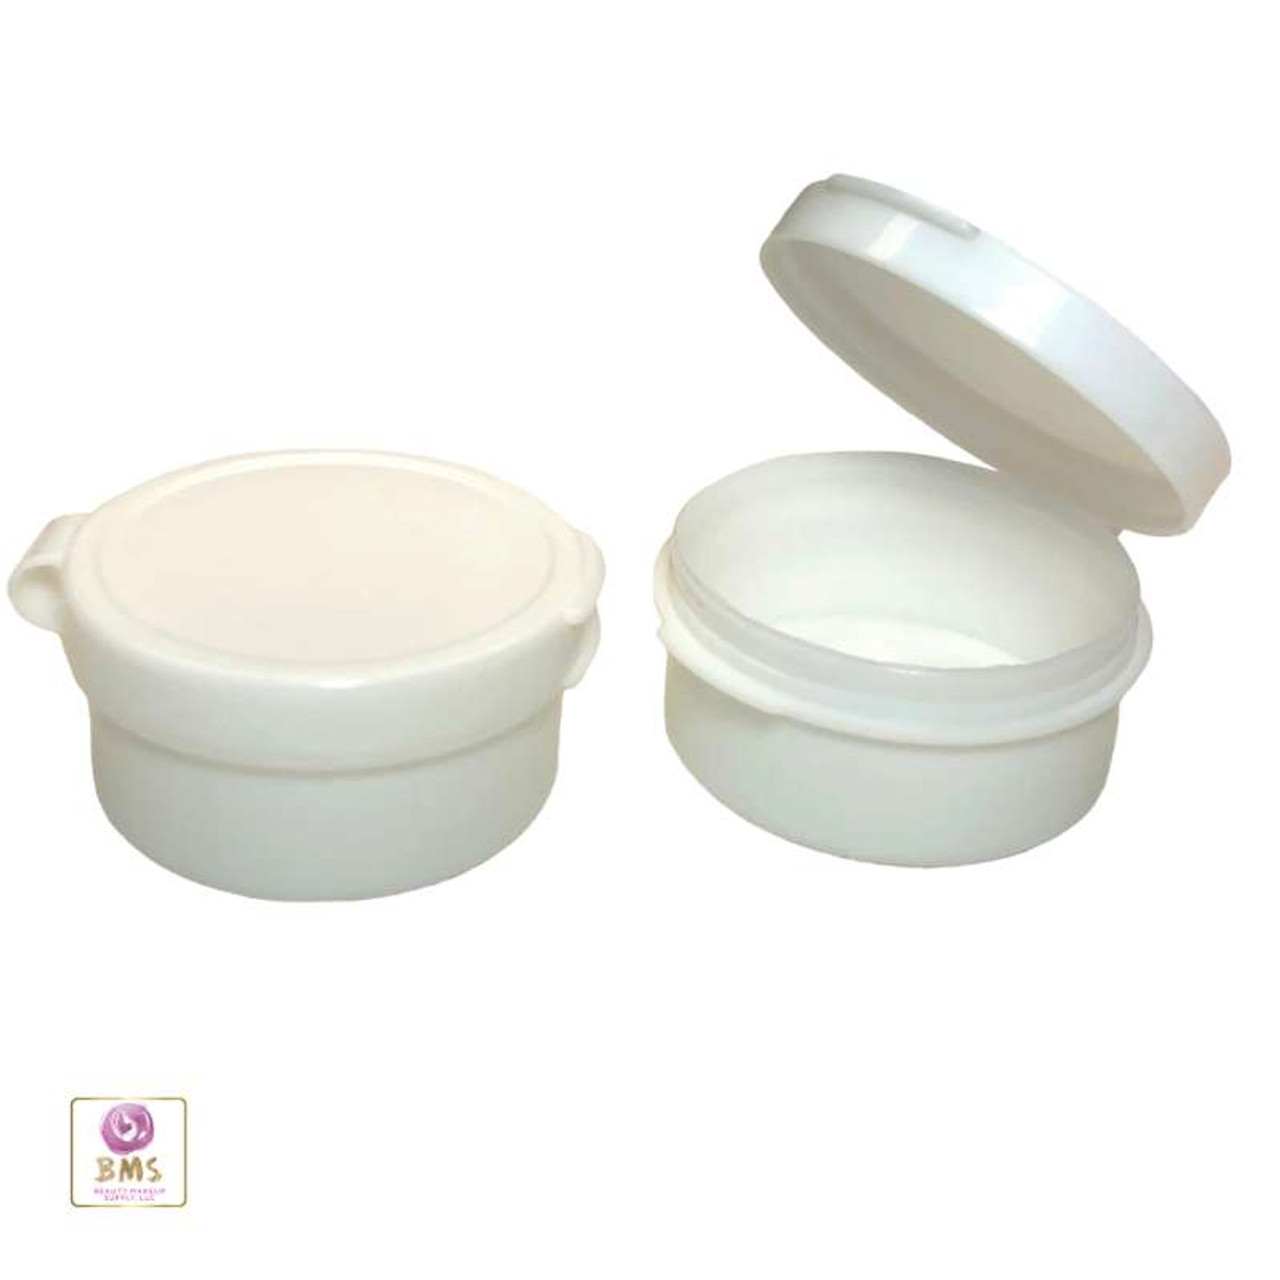 https://cdn11.bigcommerce.com/s-qd7k5gxi/images/stencil/1280x1280/products/270/6431/Cosmetic-Hinged-Lid-Jars-Beauty-Containers-10-Ml-Natural-White-Black-5098-5095-5099-Beauty-Makeup-Supply_5535__00774.1660976260.jpg?c=2?imbypass=on